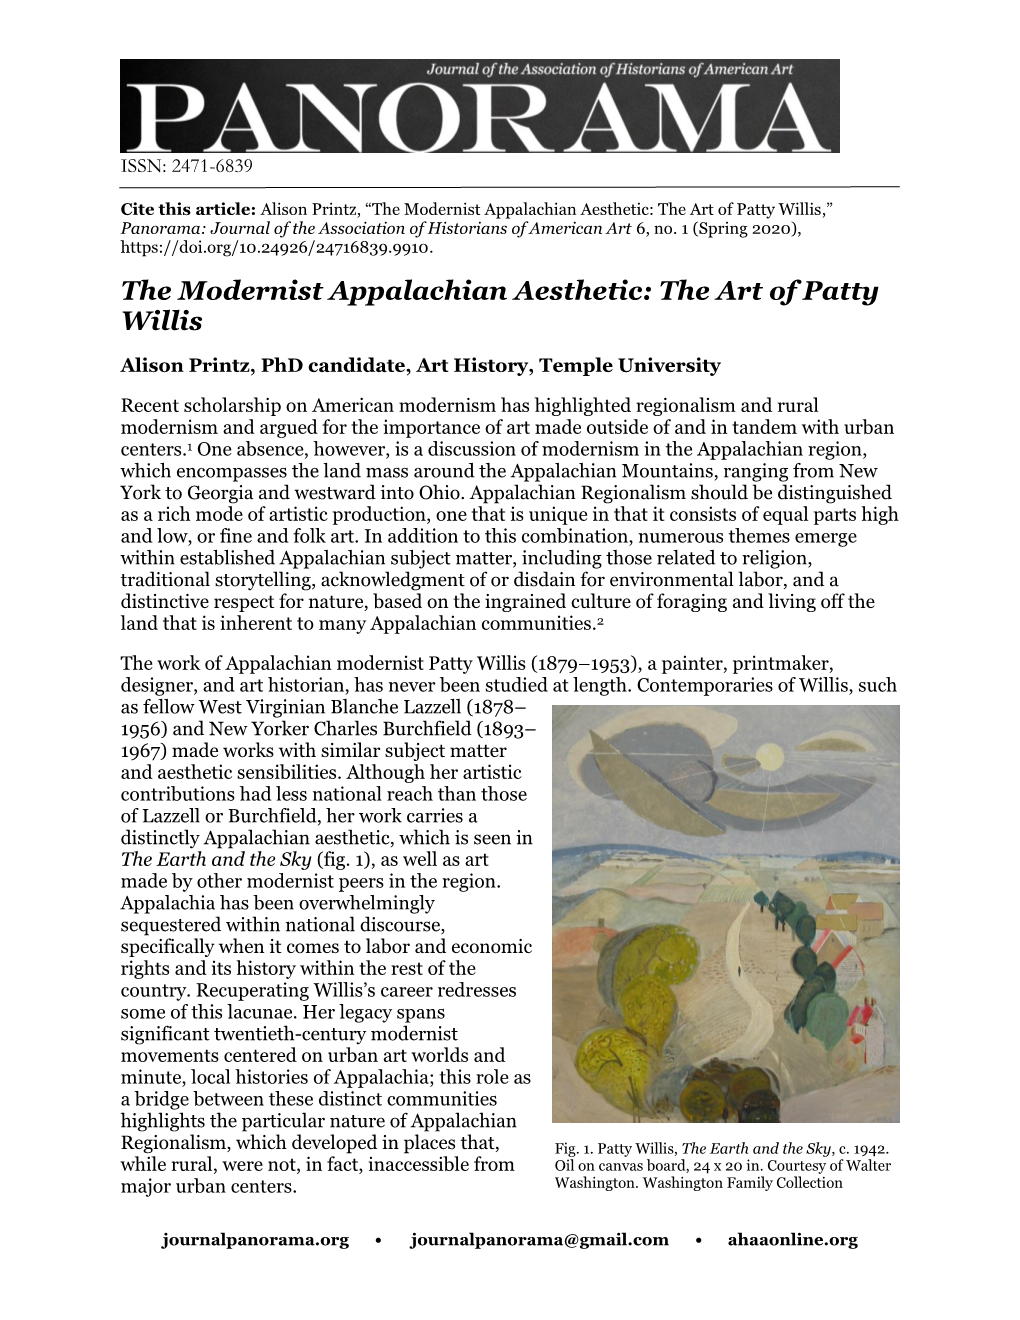 The Modernist Appalachian Aesthetic: the Art of Patty Willis,” Panorama: Journal of the Association of Historians of American Art 6, No